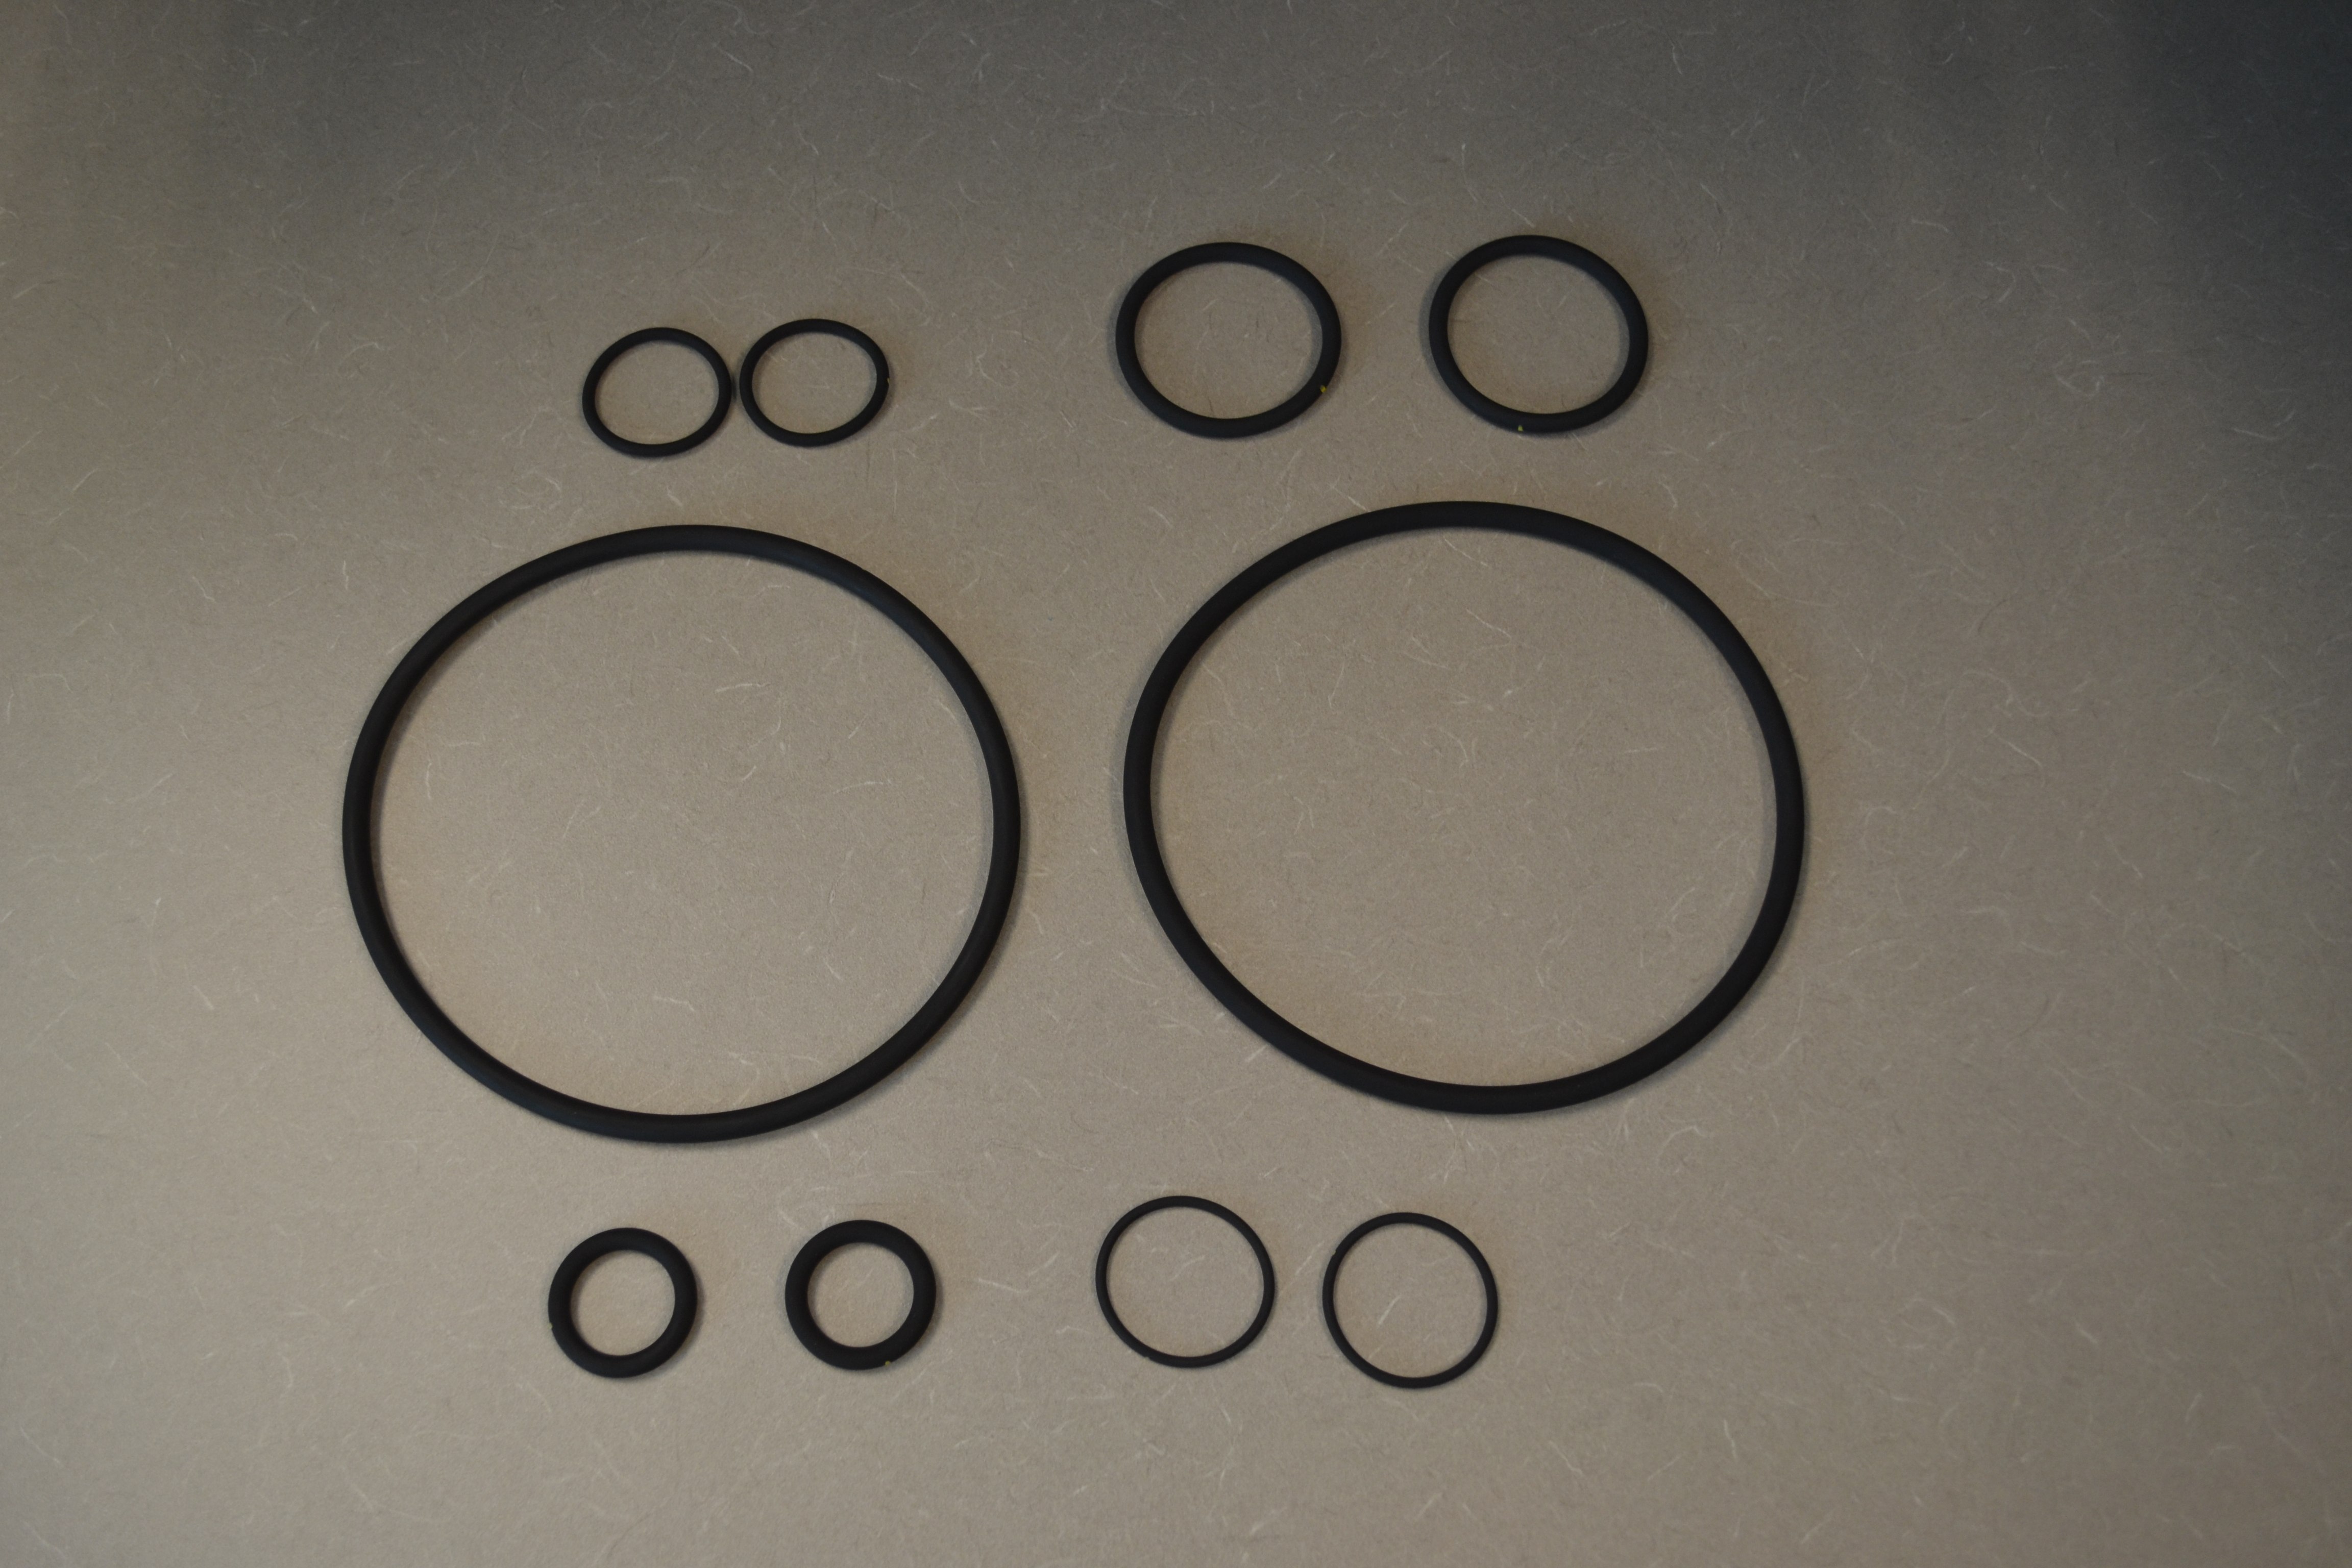 CHARGES LAID – Pictured here are look-a-like viton o-rings in different sizes. Lee Specialties Ltd. has been charged for unlawful export of goods to Iran.